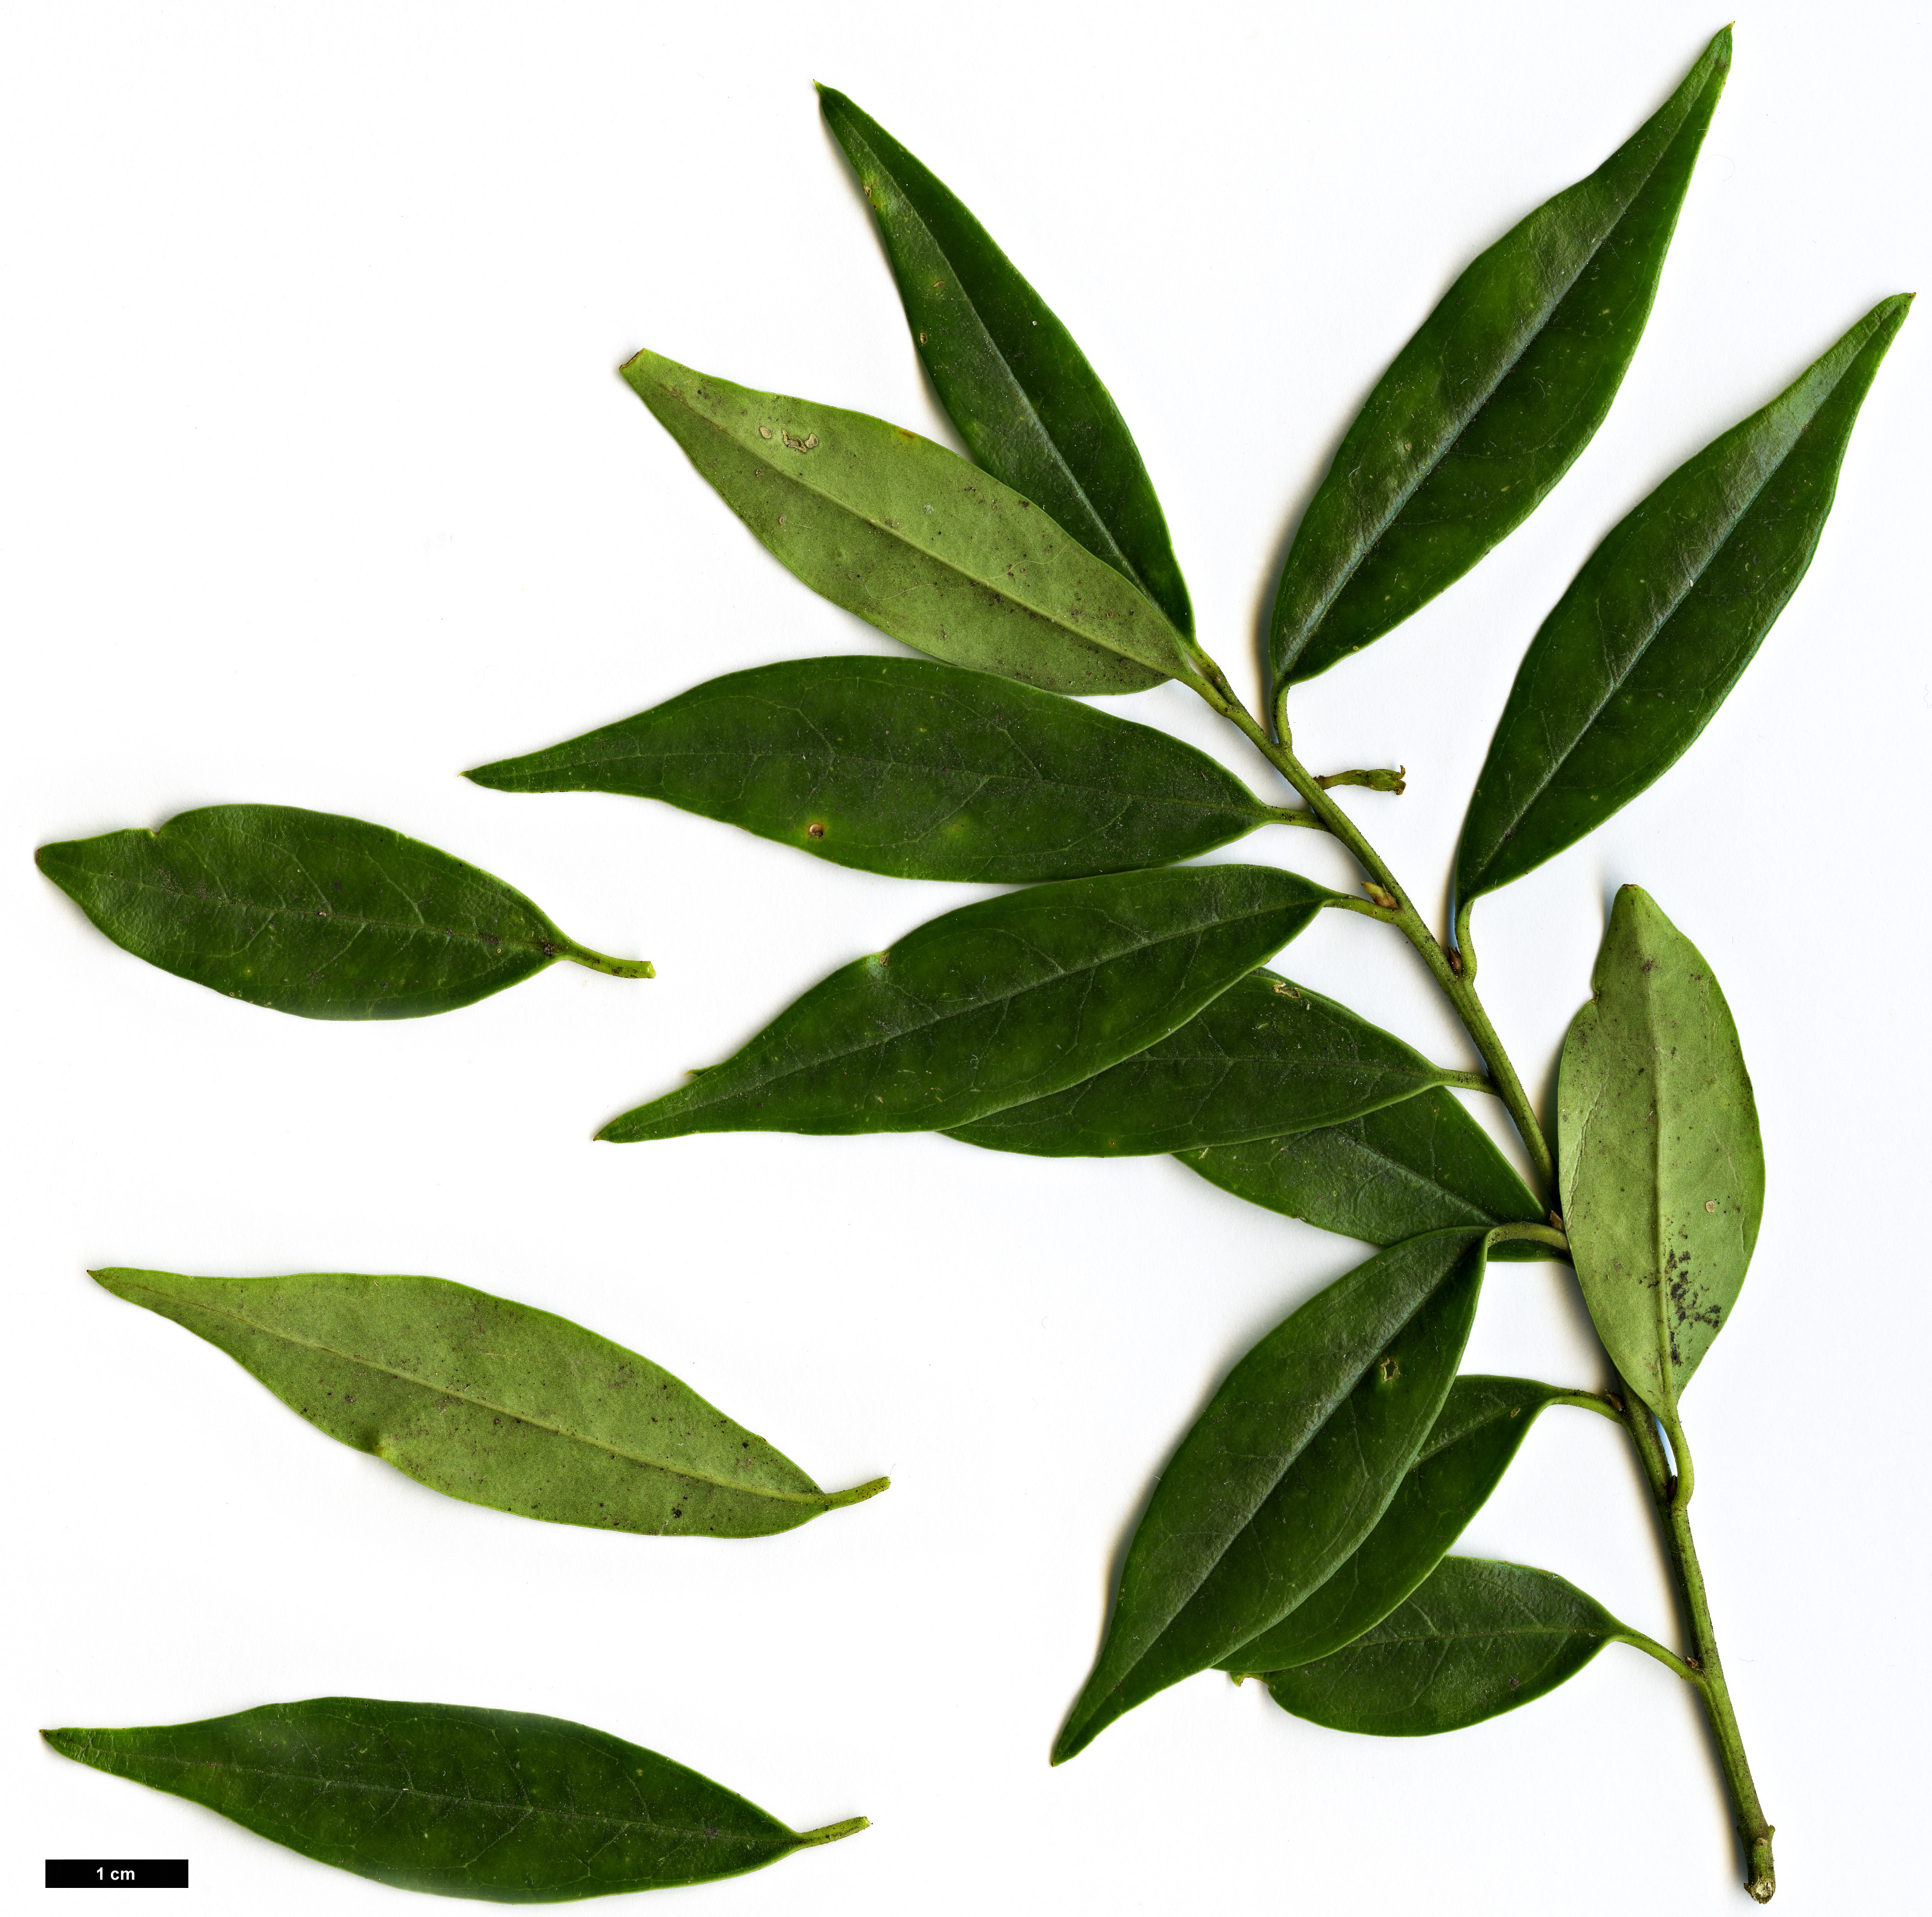 High resolution image: Family: Buxaceae - Genus: Sarcococca - Taxon: hookeriana